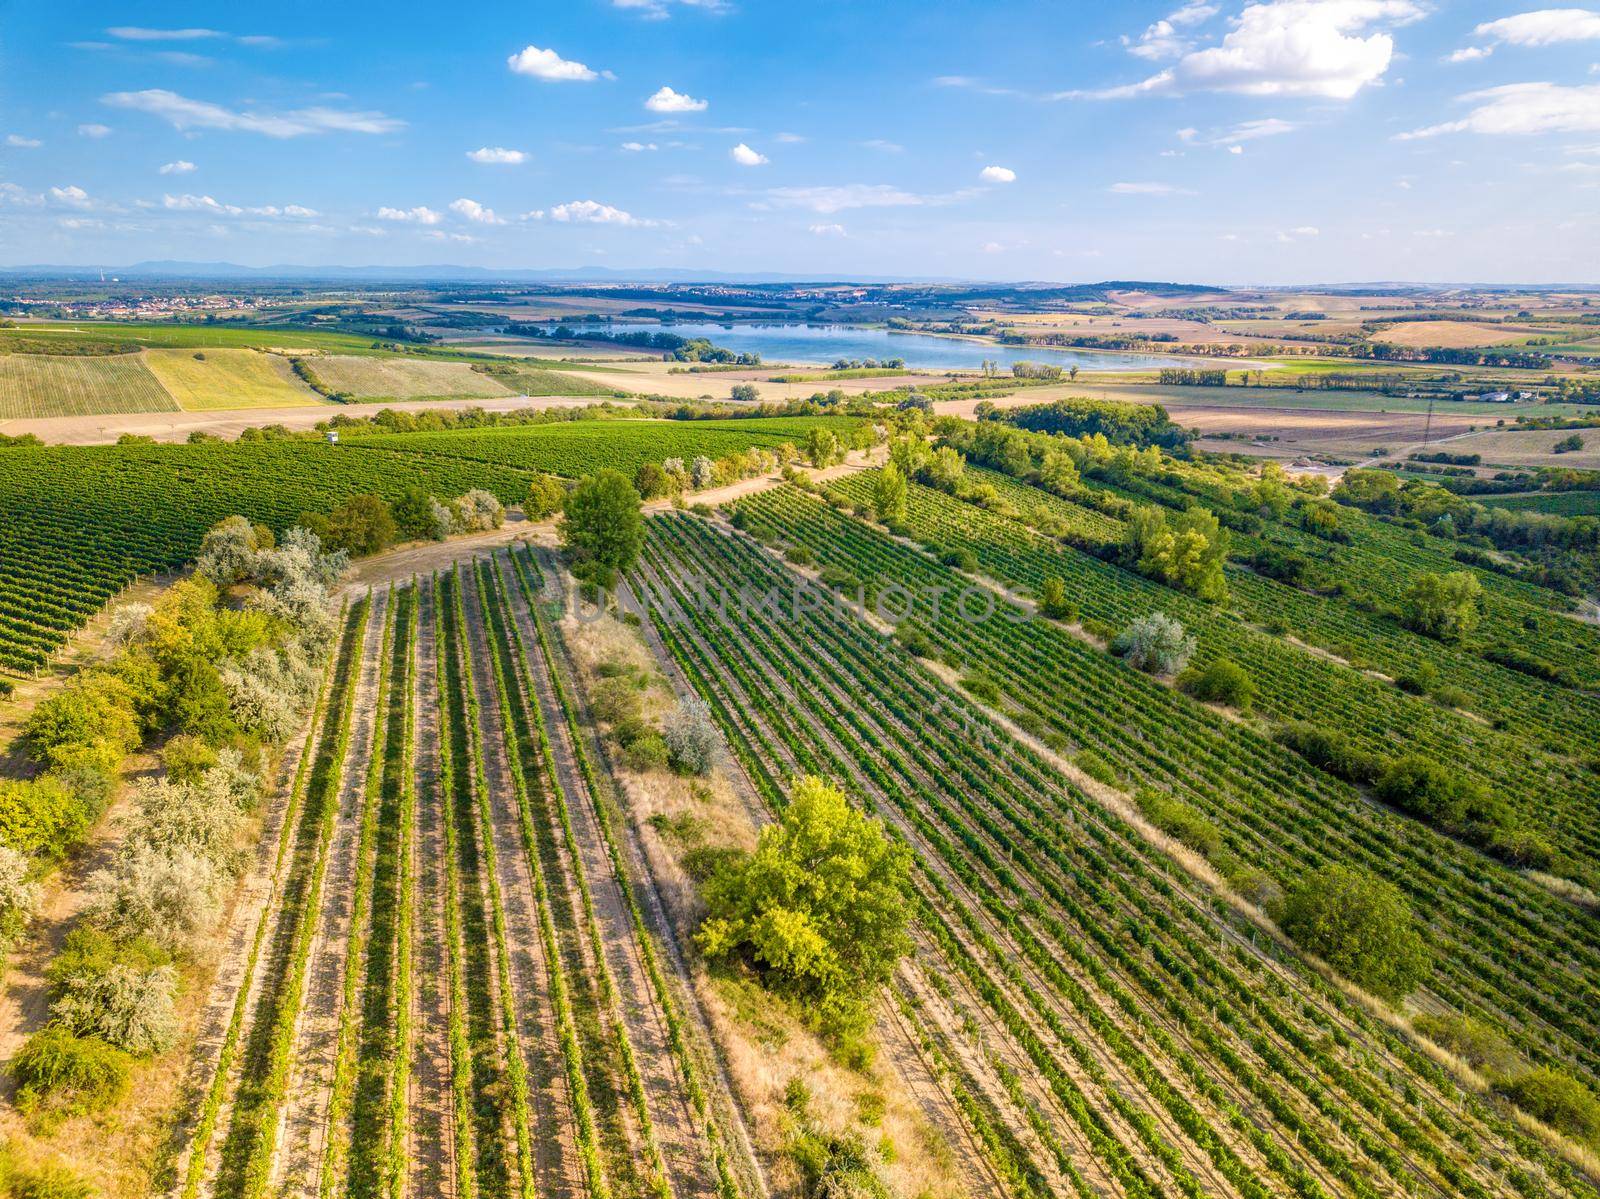 Vineyards in Palava region, Landscape of South Moravia, Czech Republic, view from above, drone shoot